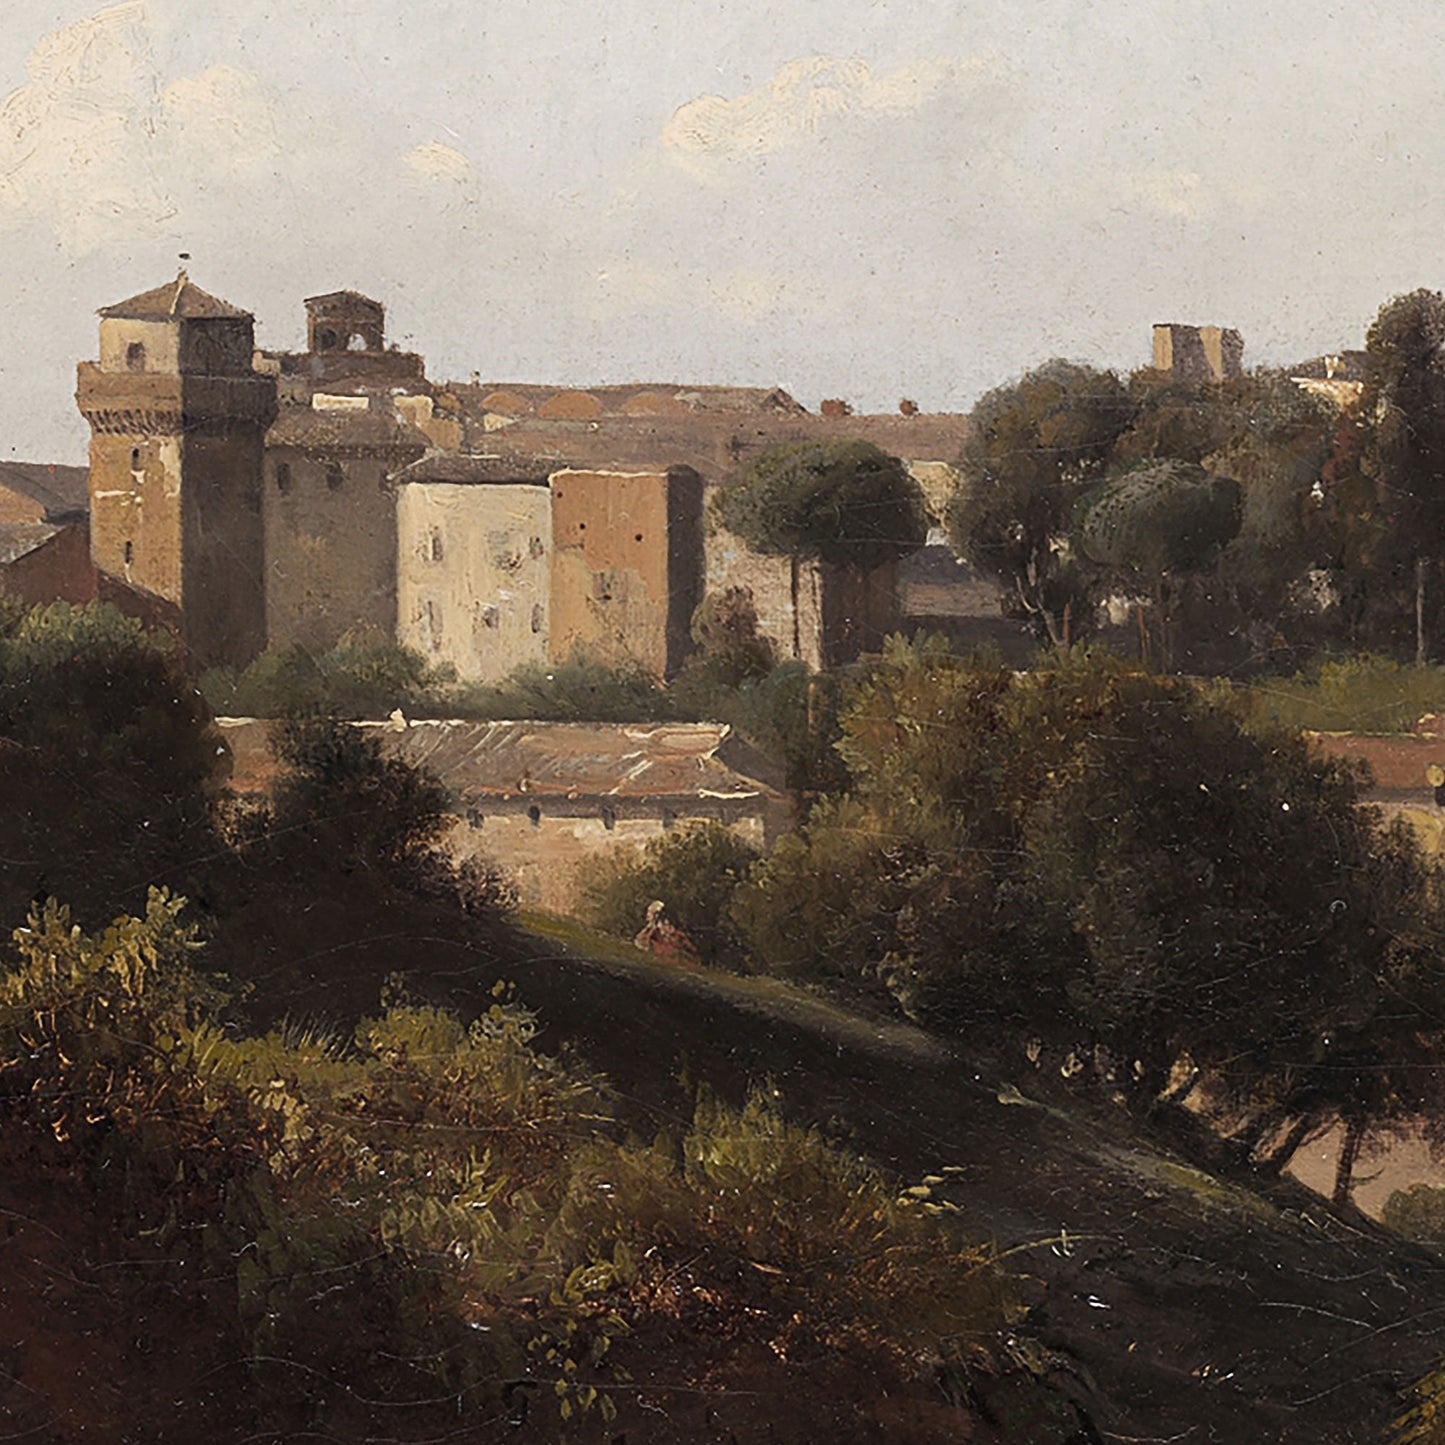 View of Ancient Rome - Vintage City Landscape Painting - Old Painting Replica - Greenery Landscape - Printed and Shipped to You